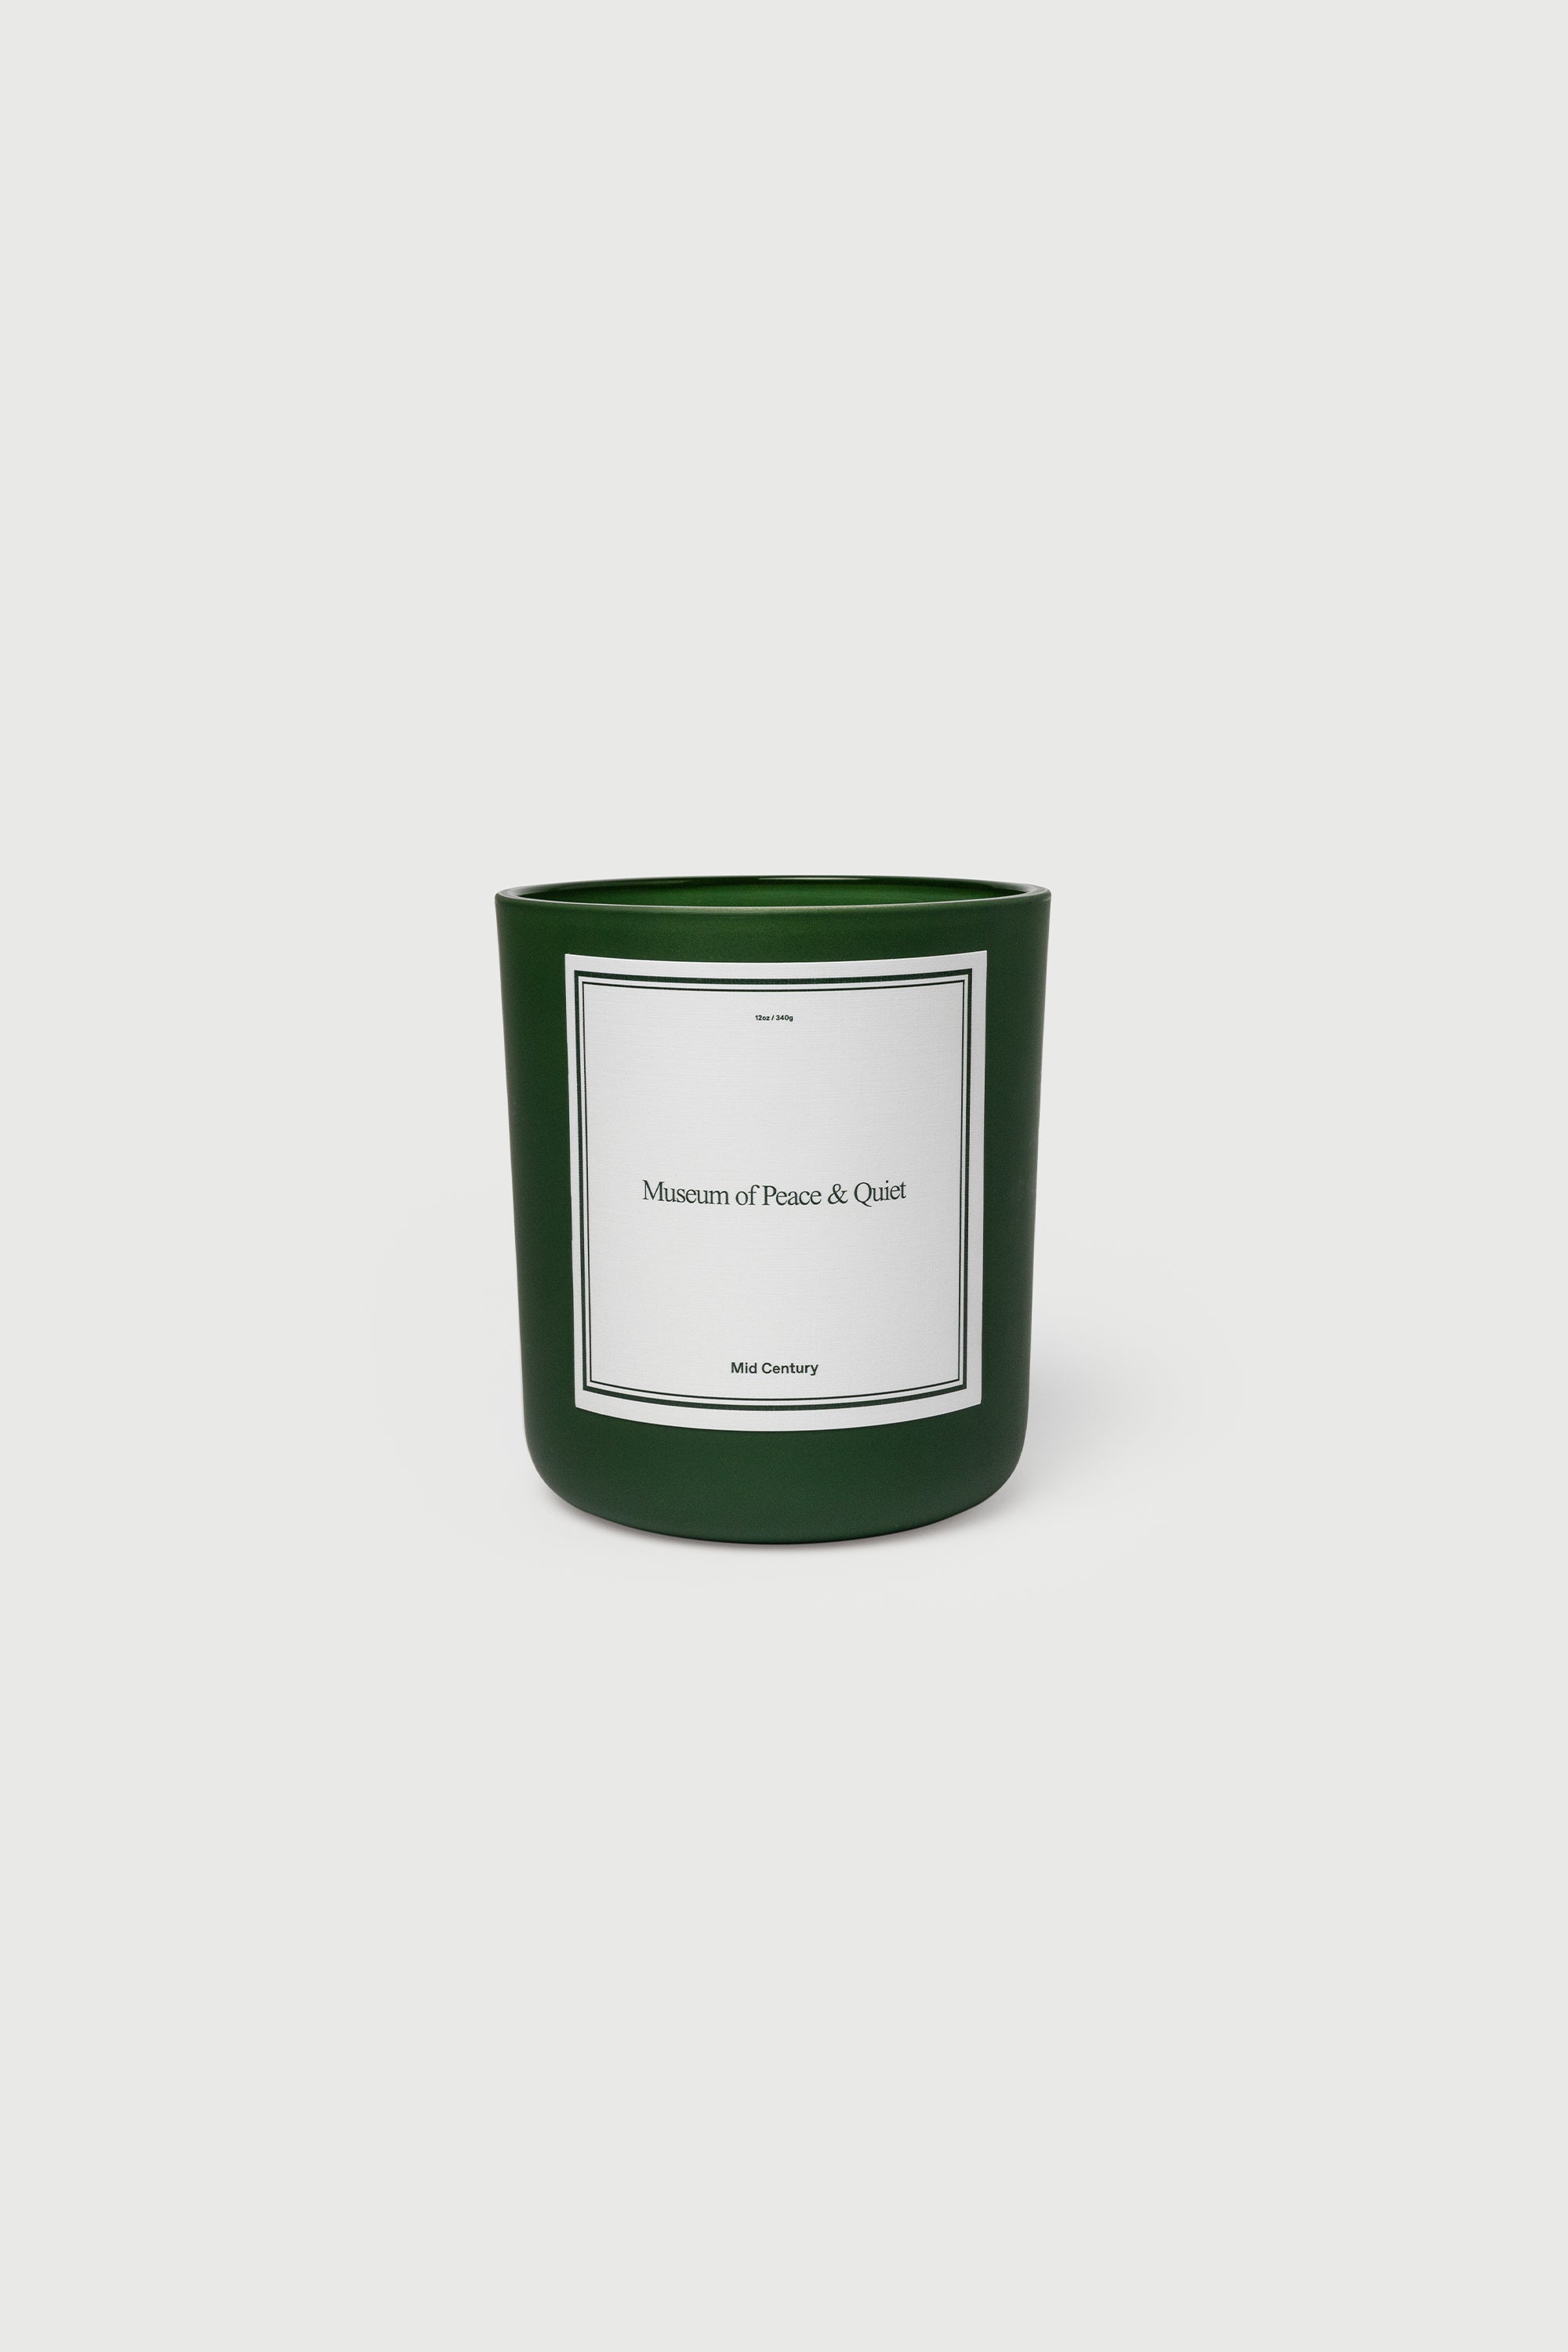 MidCentury-Candle-Front_2000x.jpg?v=1692